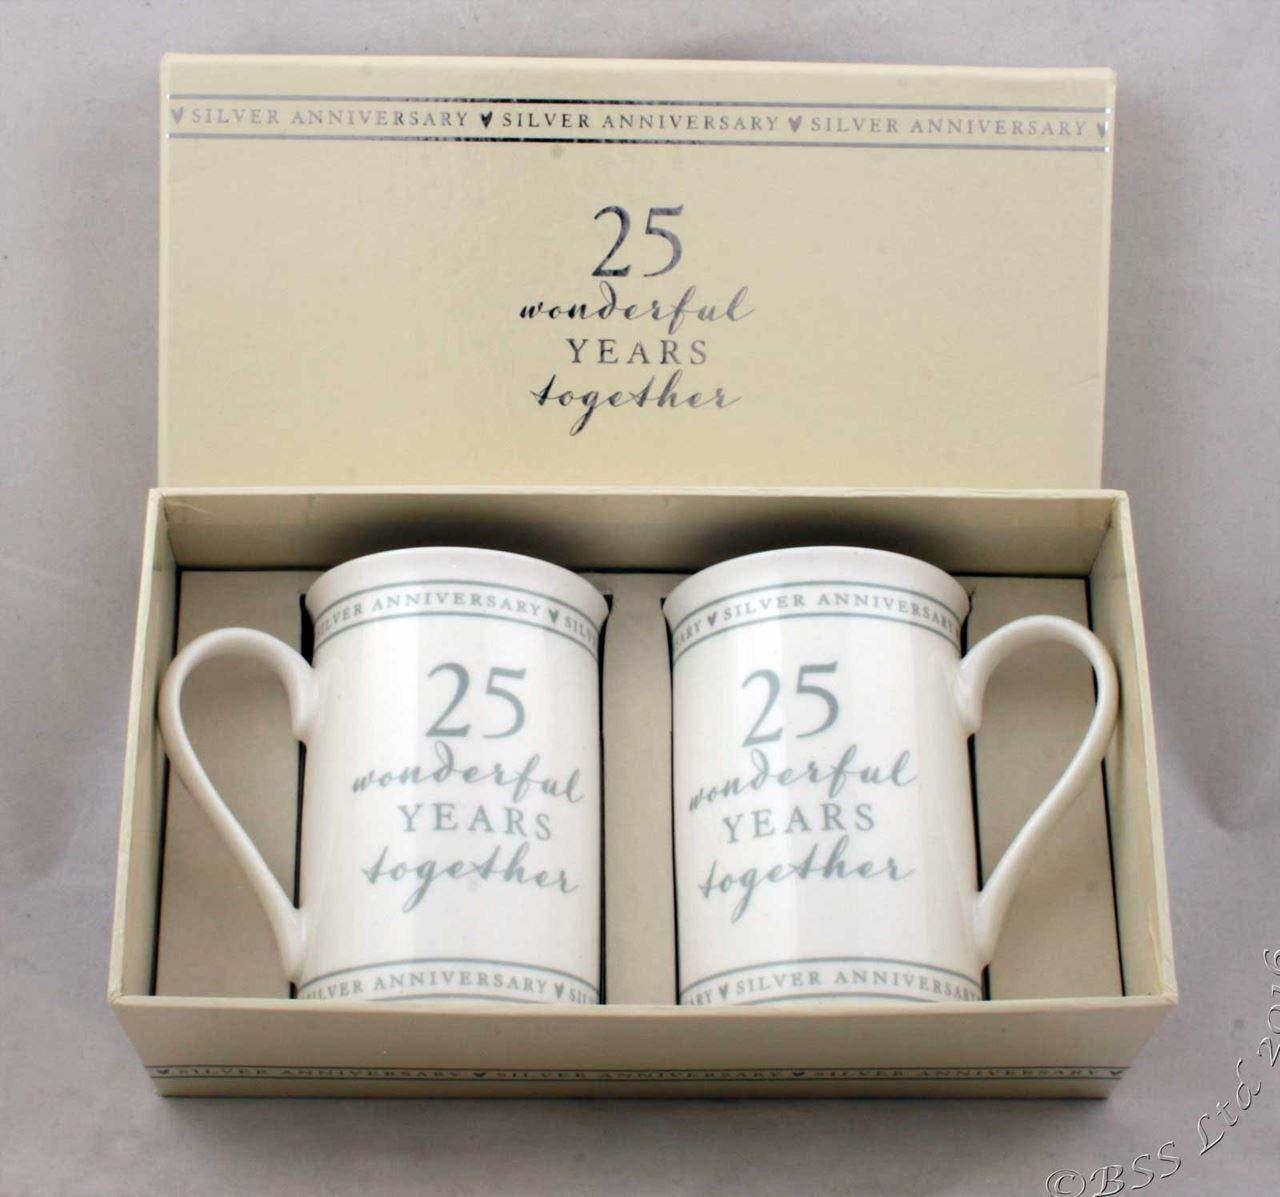 25Th Anniversary Gift Ideas For Couples
 The 20 Best Ideas for 25th Anniversary Gift Ideas for